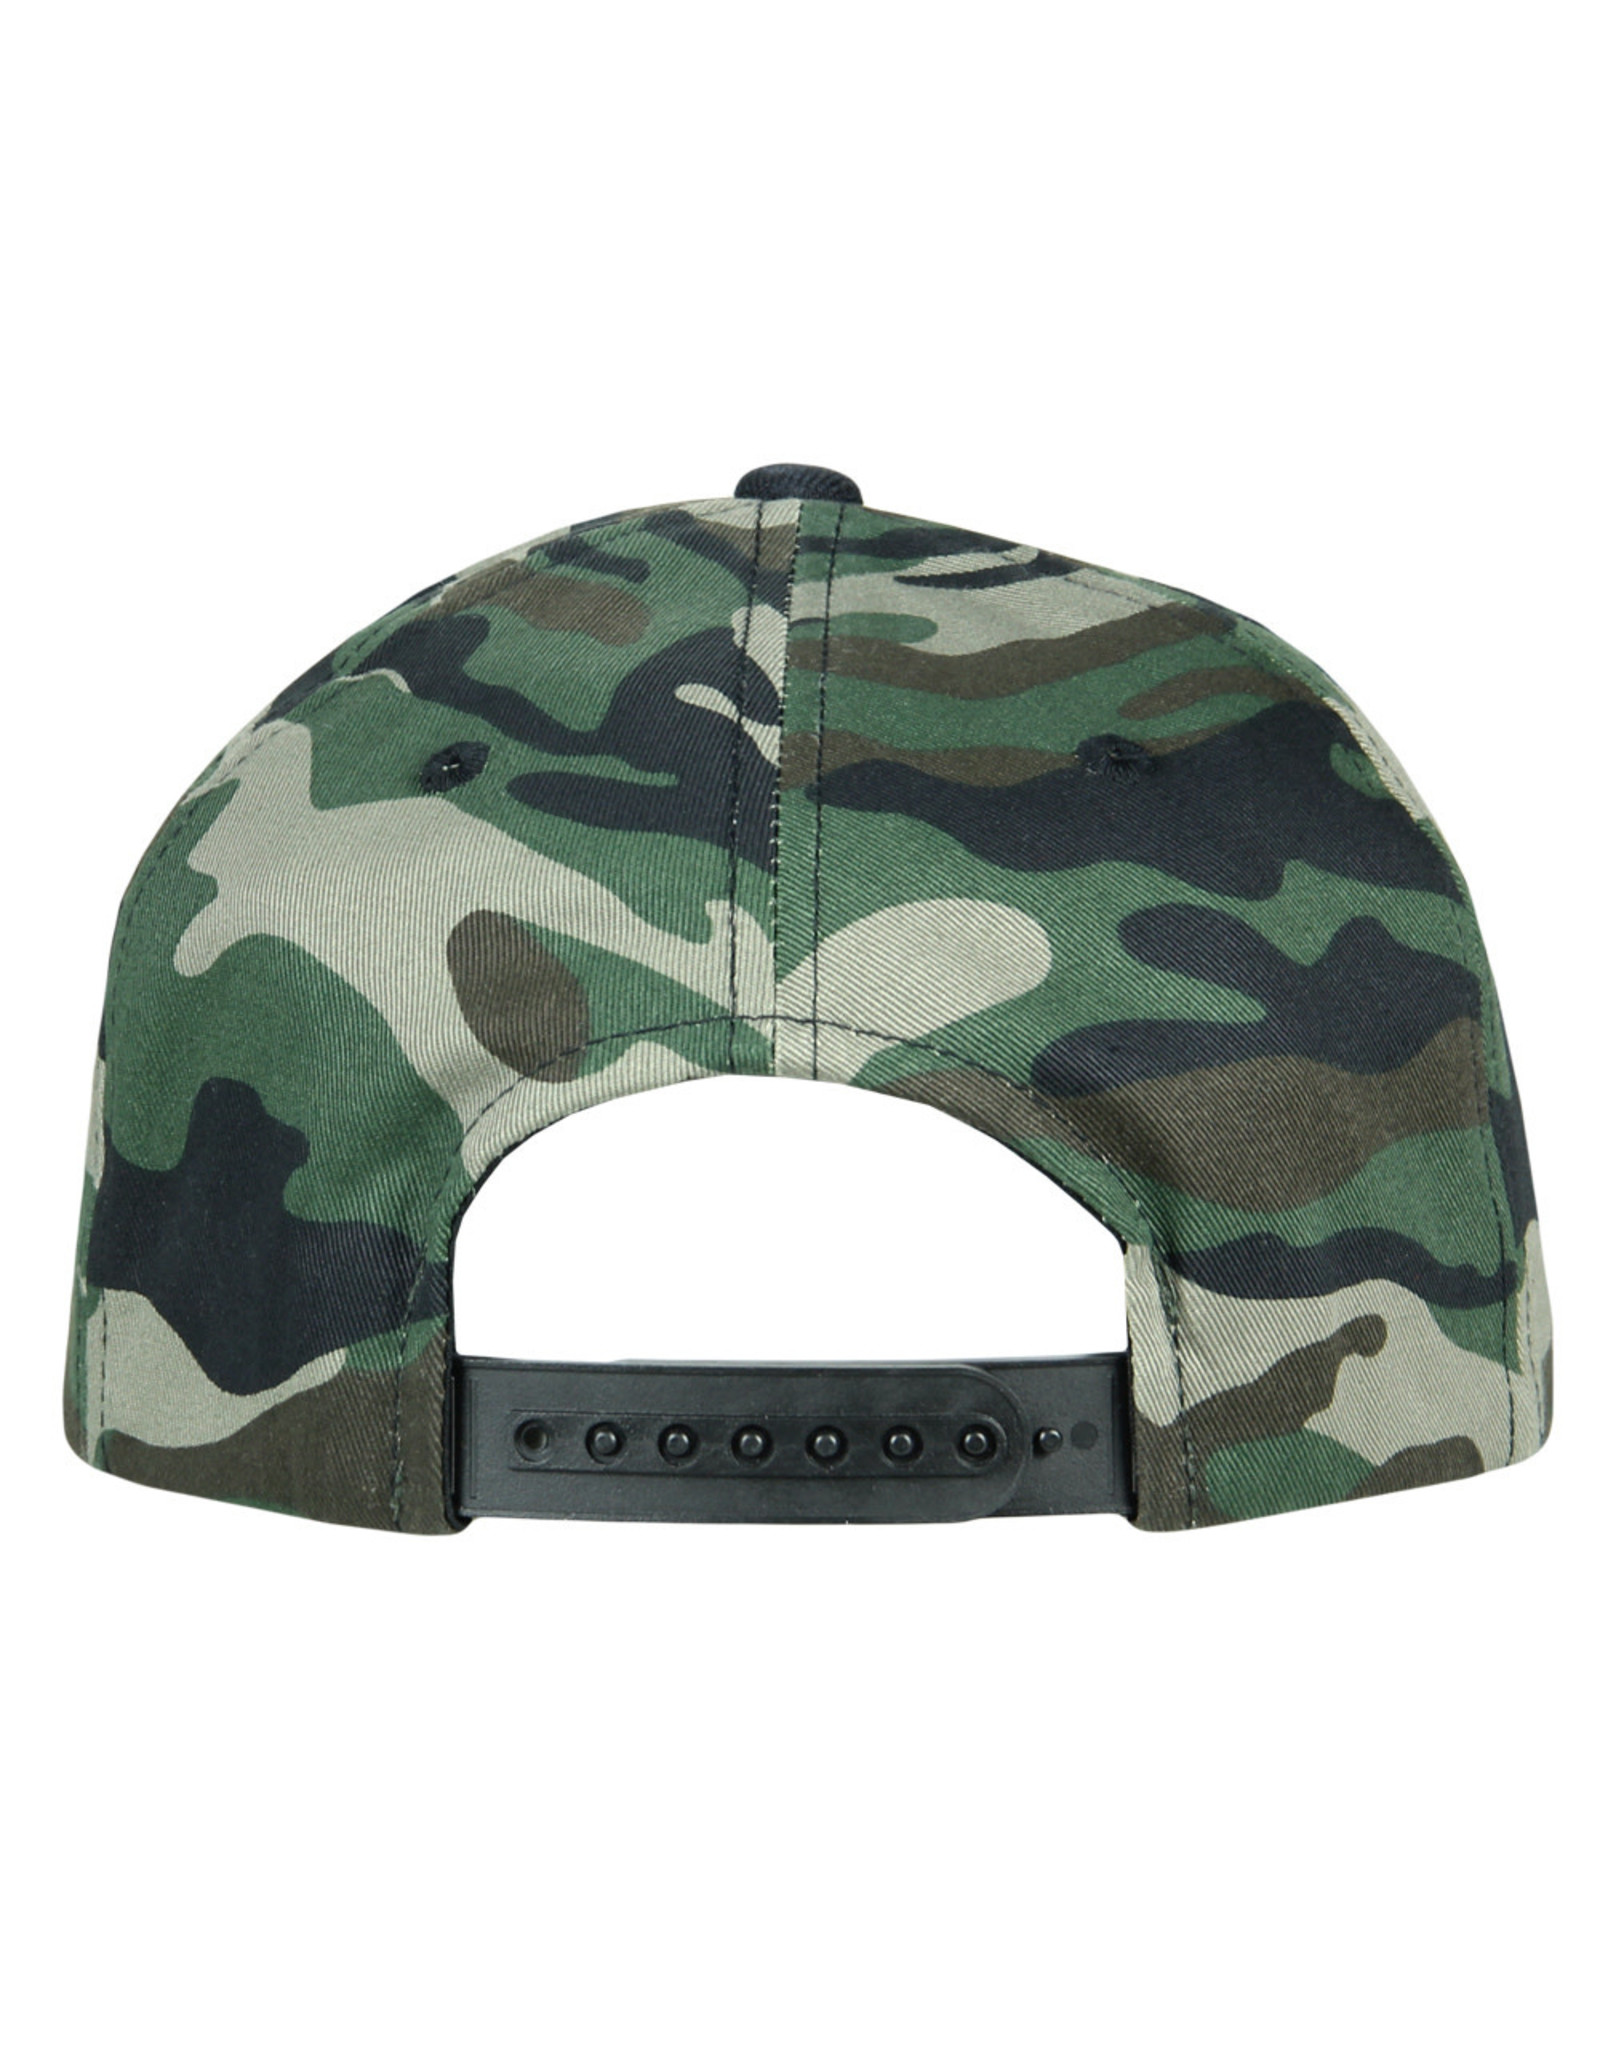 Touch Of Class Camo Pro Fit Snapback Hat L/XL